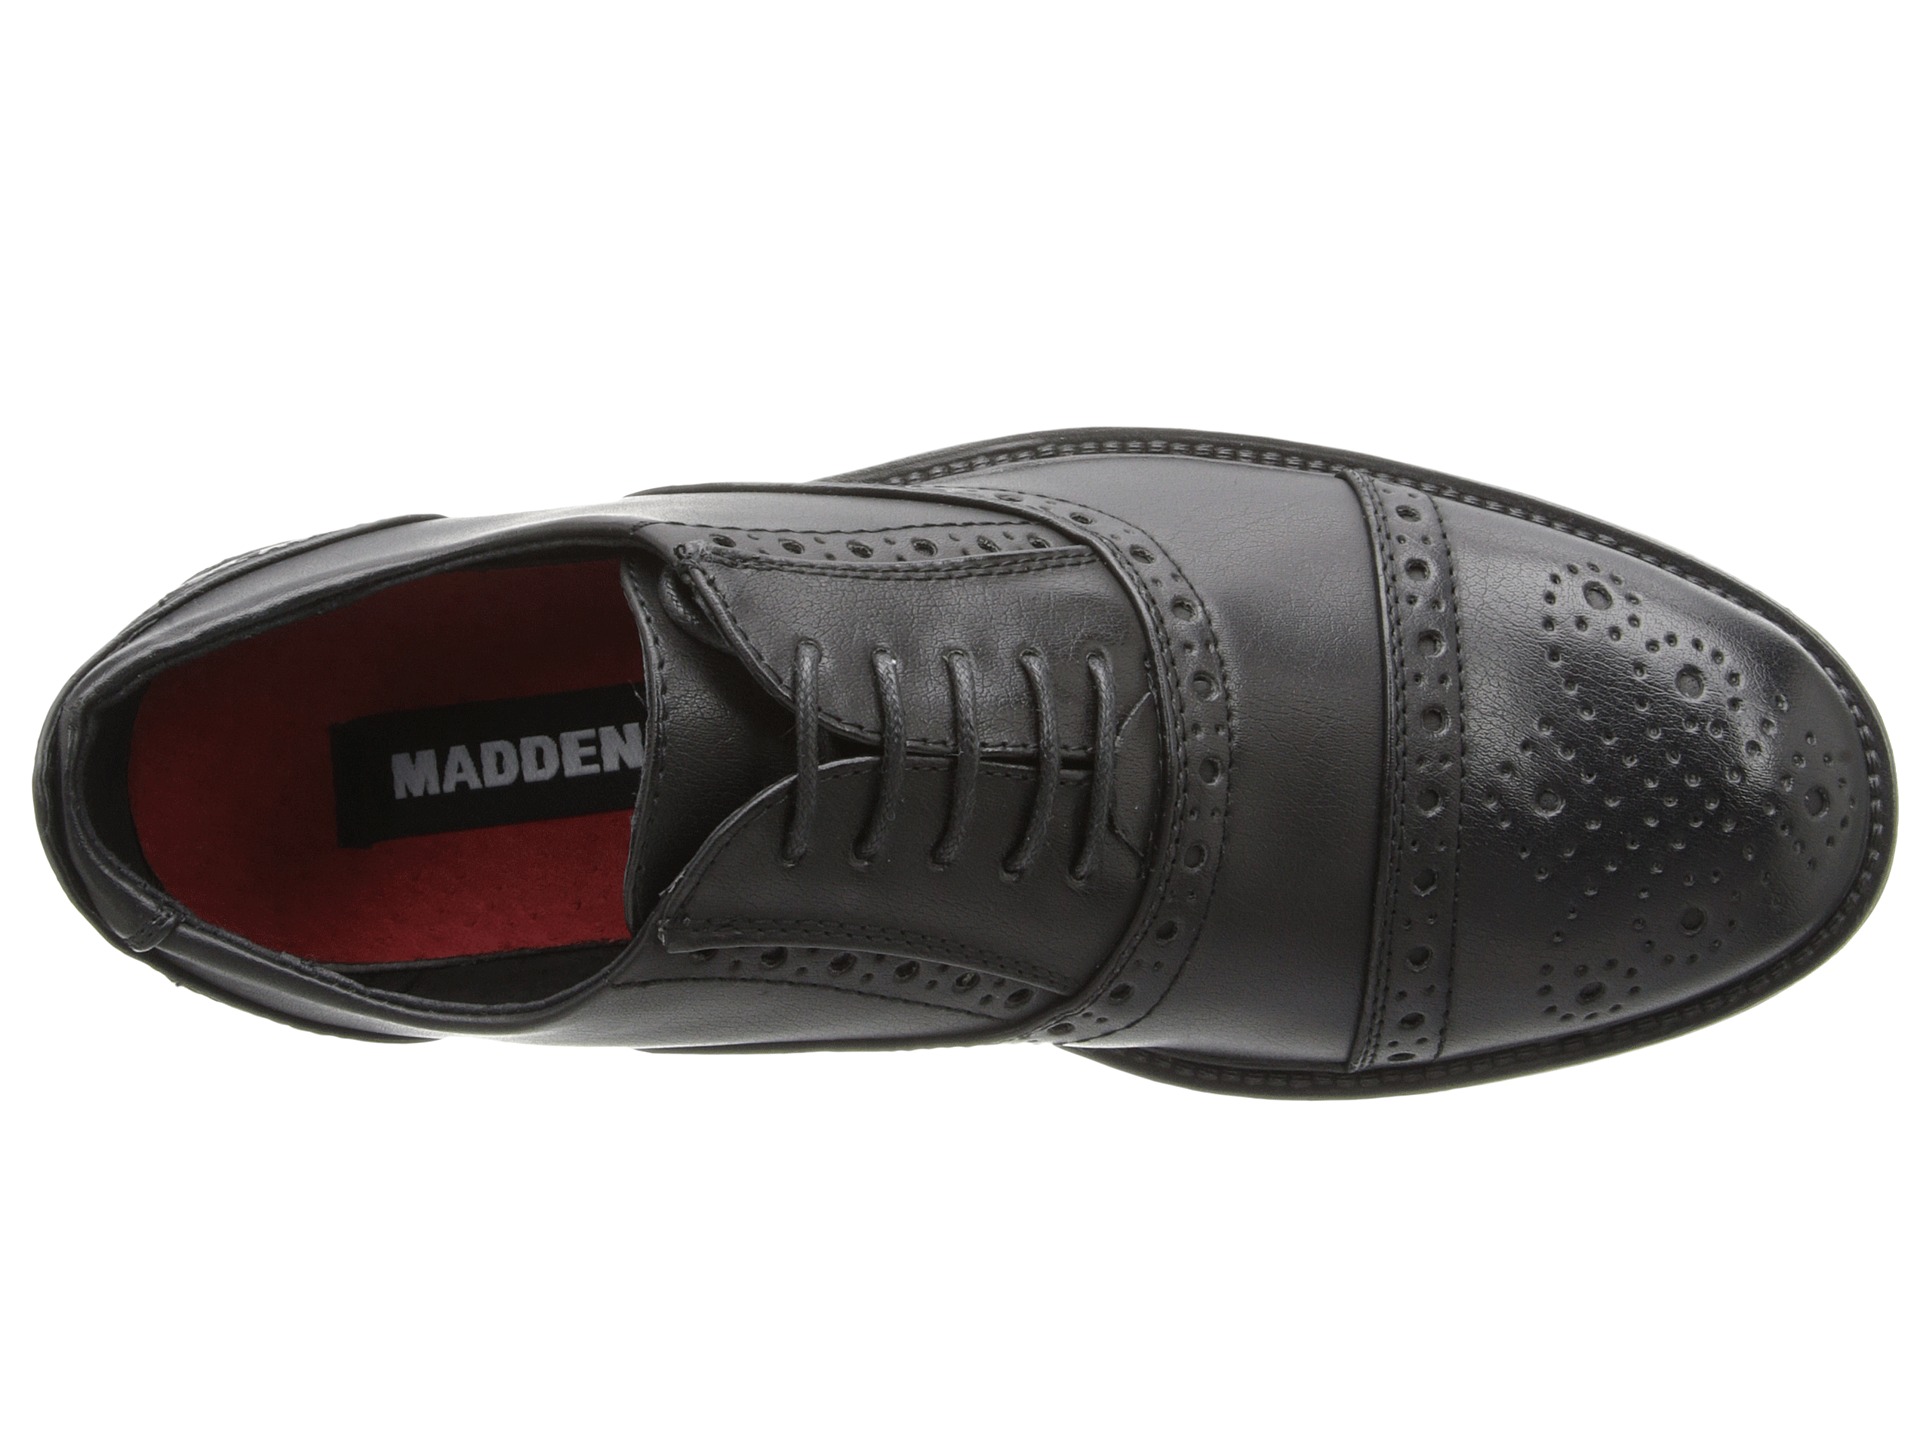 Steve Madden M Ziggy, Shoes | Shipped Free at Zappos